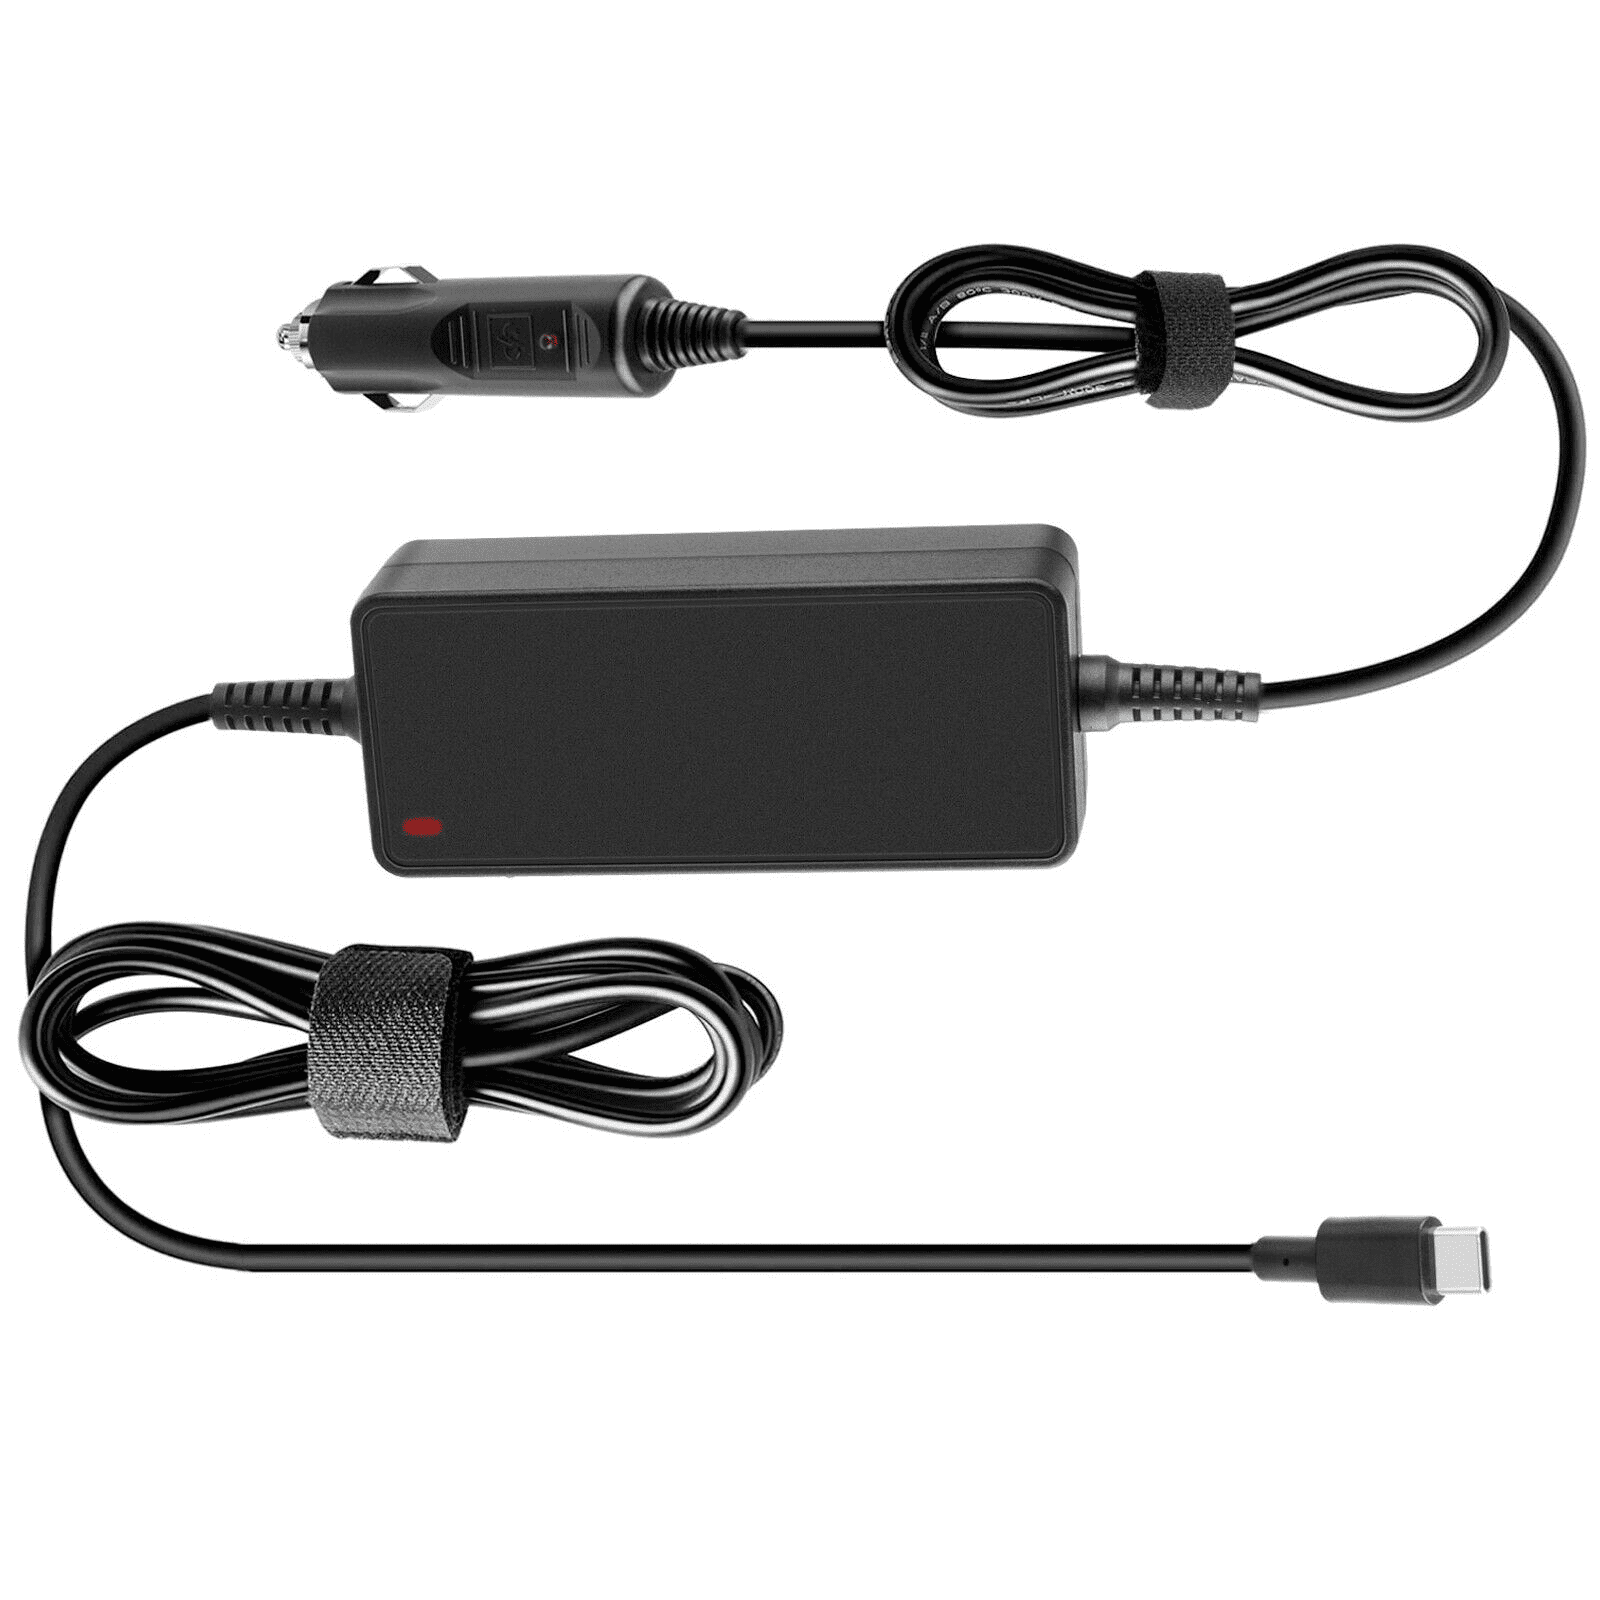  Power4Laptops DC Adapter Laptop Car Charger Compatible